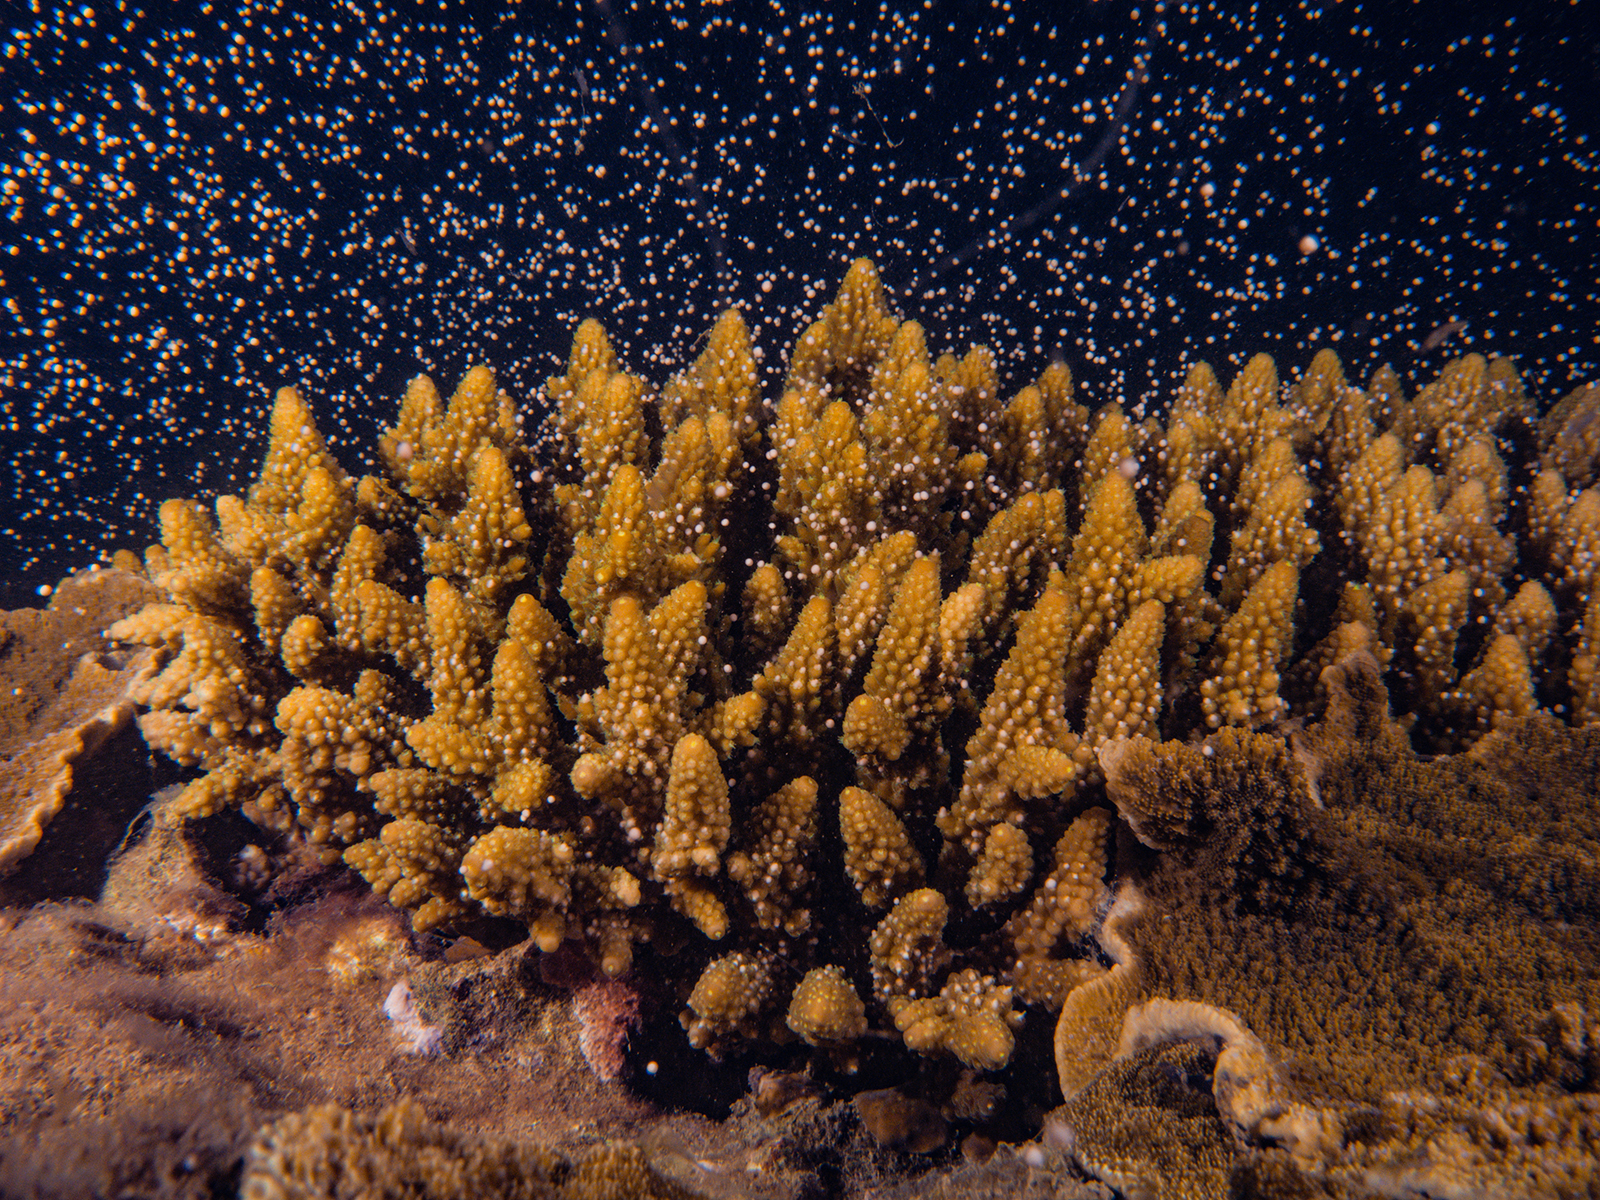 Coral spawning on the Great Barrier Reef